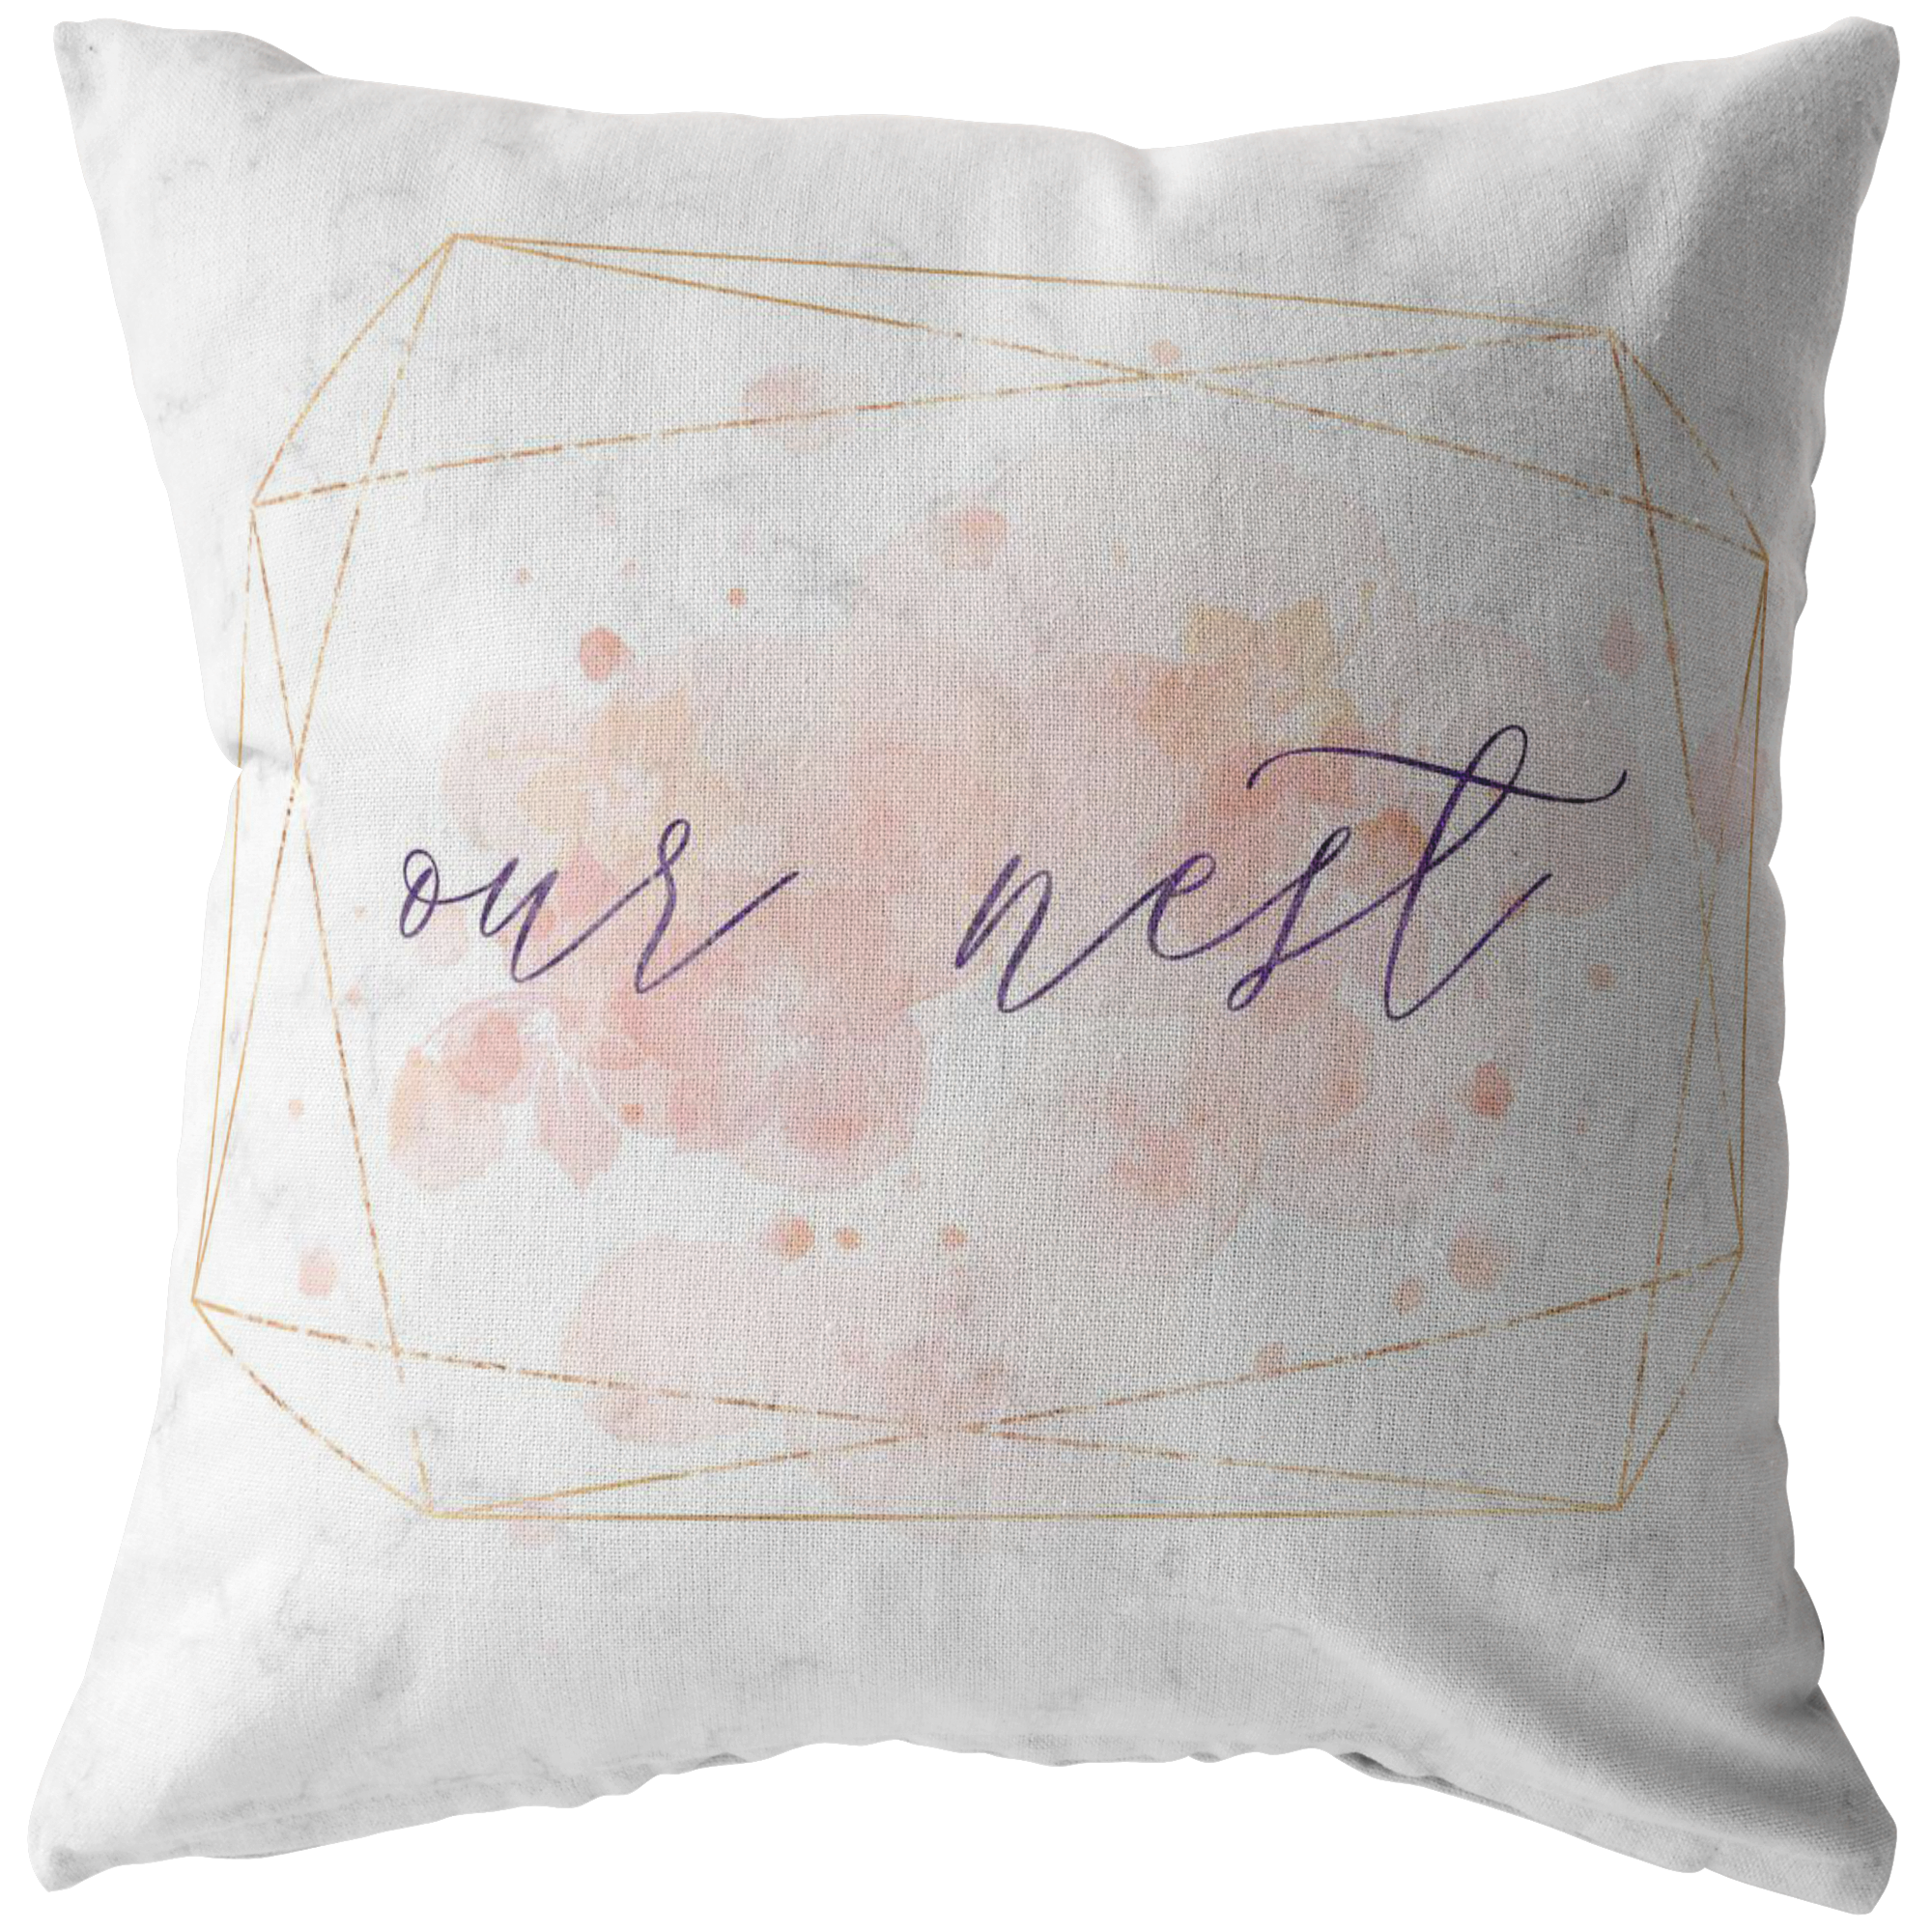 "Our Nest" Pillow